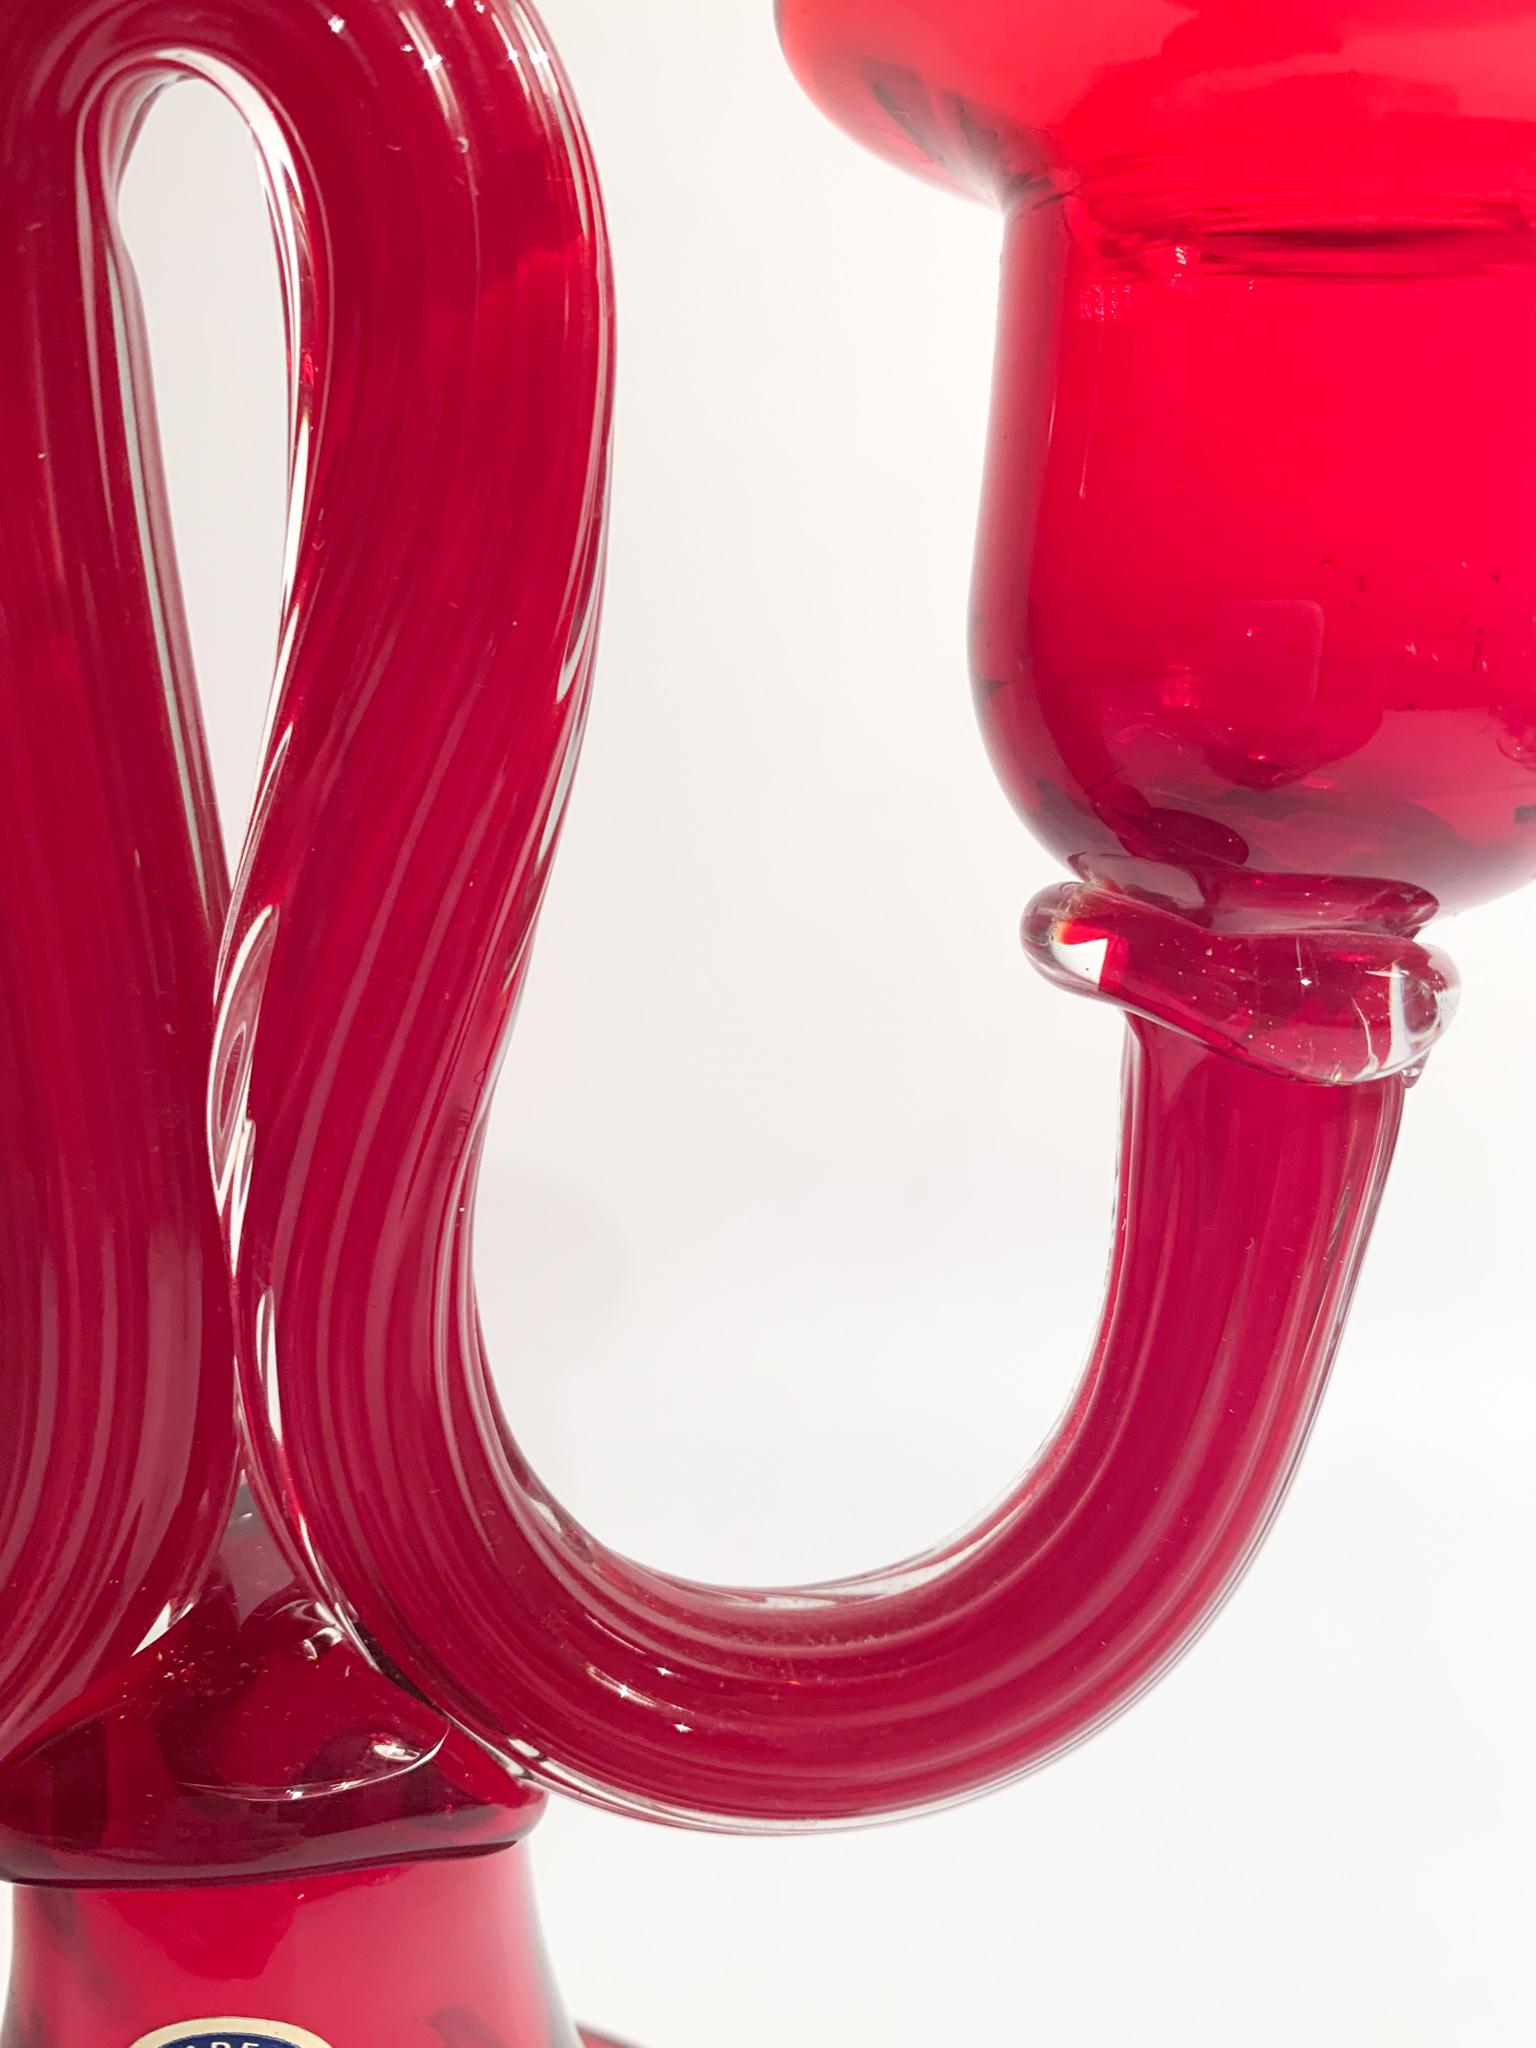 Mid-20th Century Three-armed Candelabra in Red Murano Glass from the 1950s